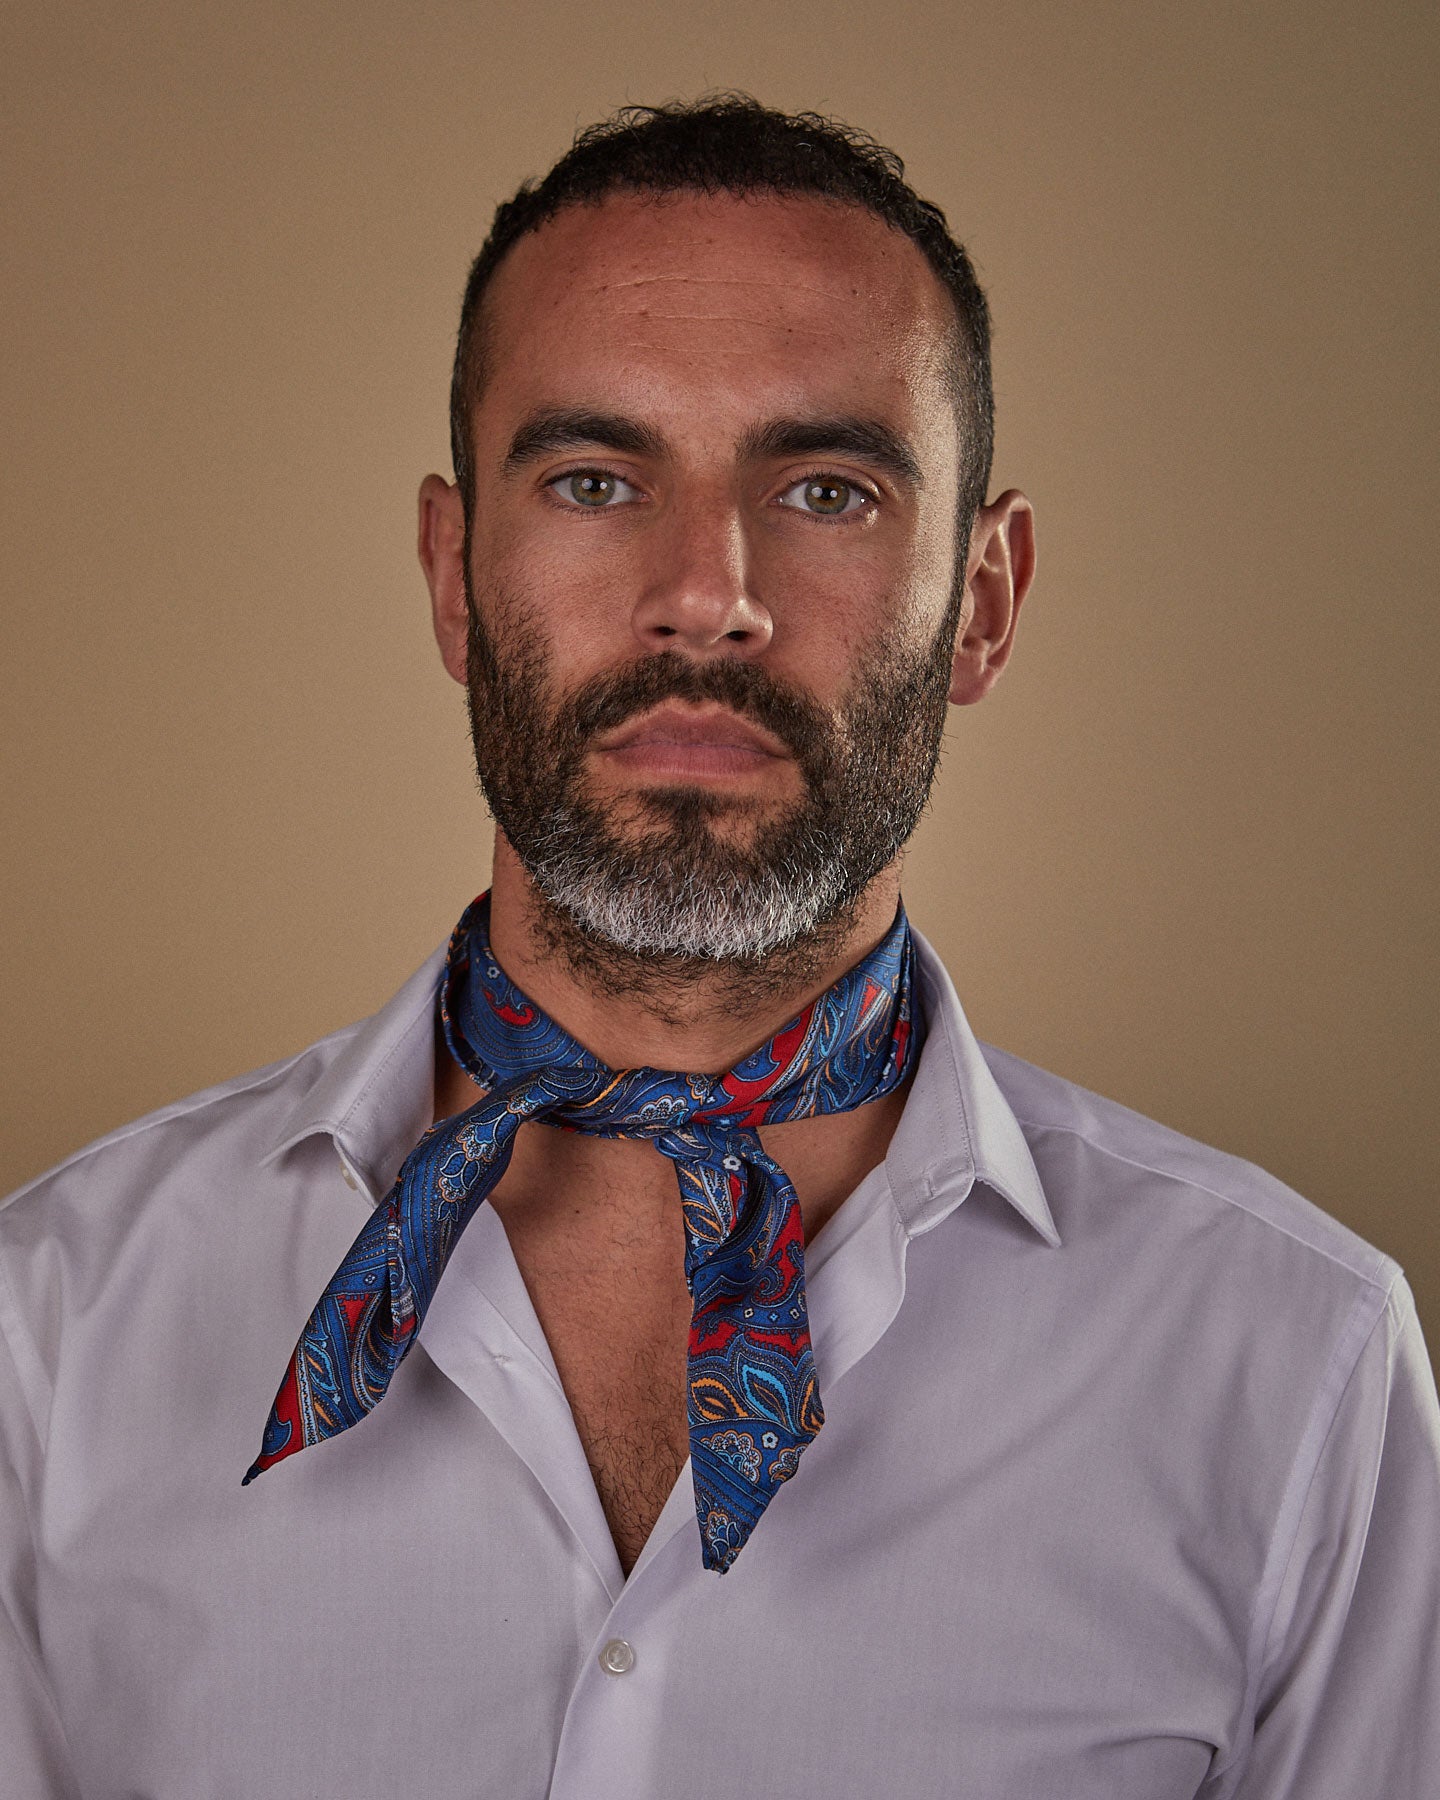 Portrait view of model looking straight ahead, wearing 'The Oxford' red and blue paisley neckerchief tied in a simple front-facing knot.